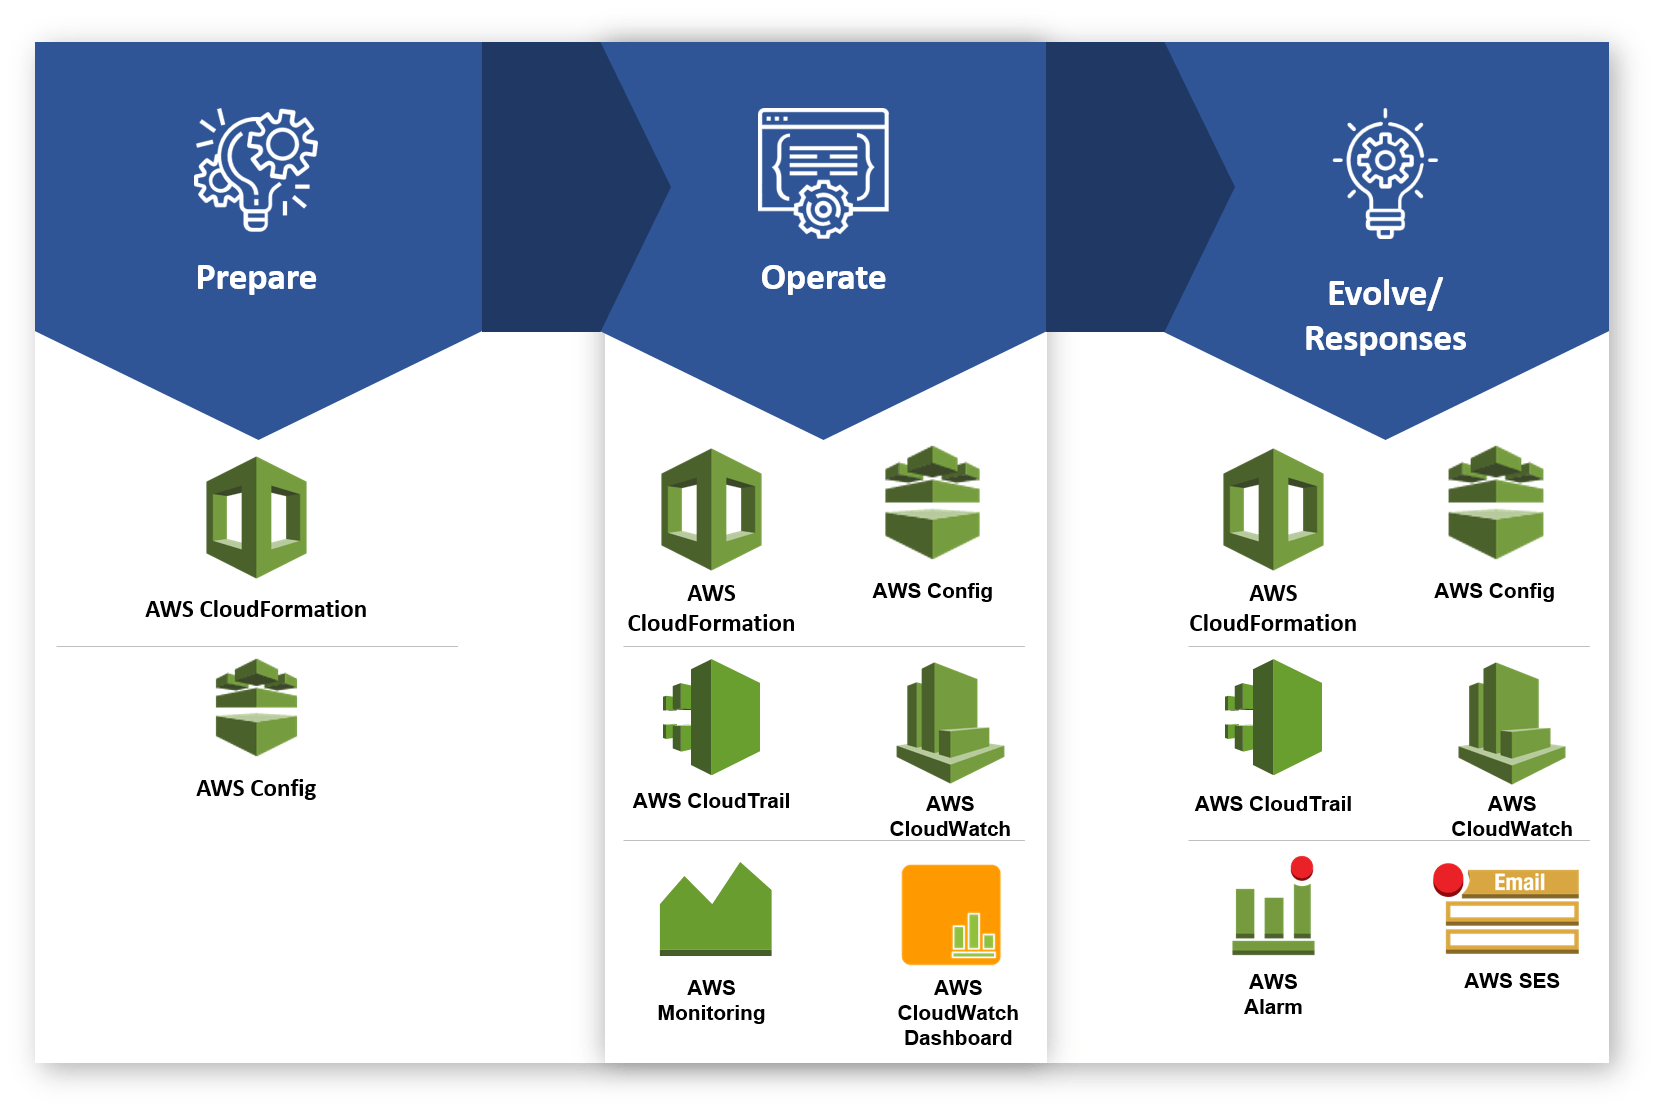 Pillar Operational Excellence Well-architected AWS